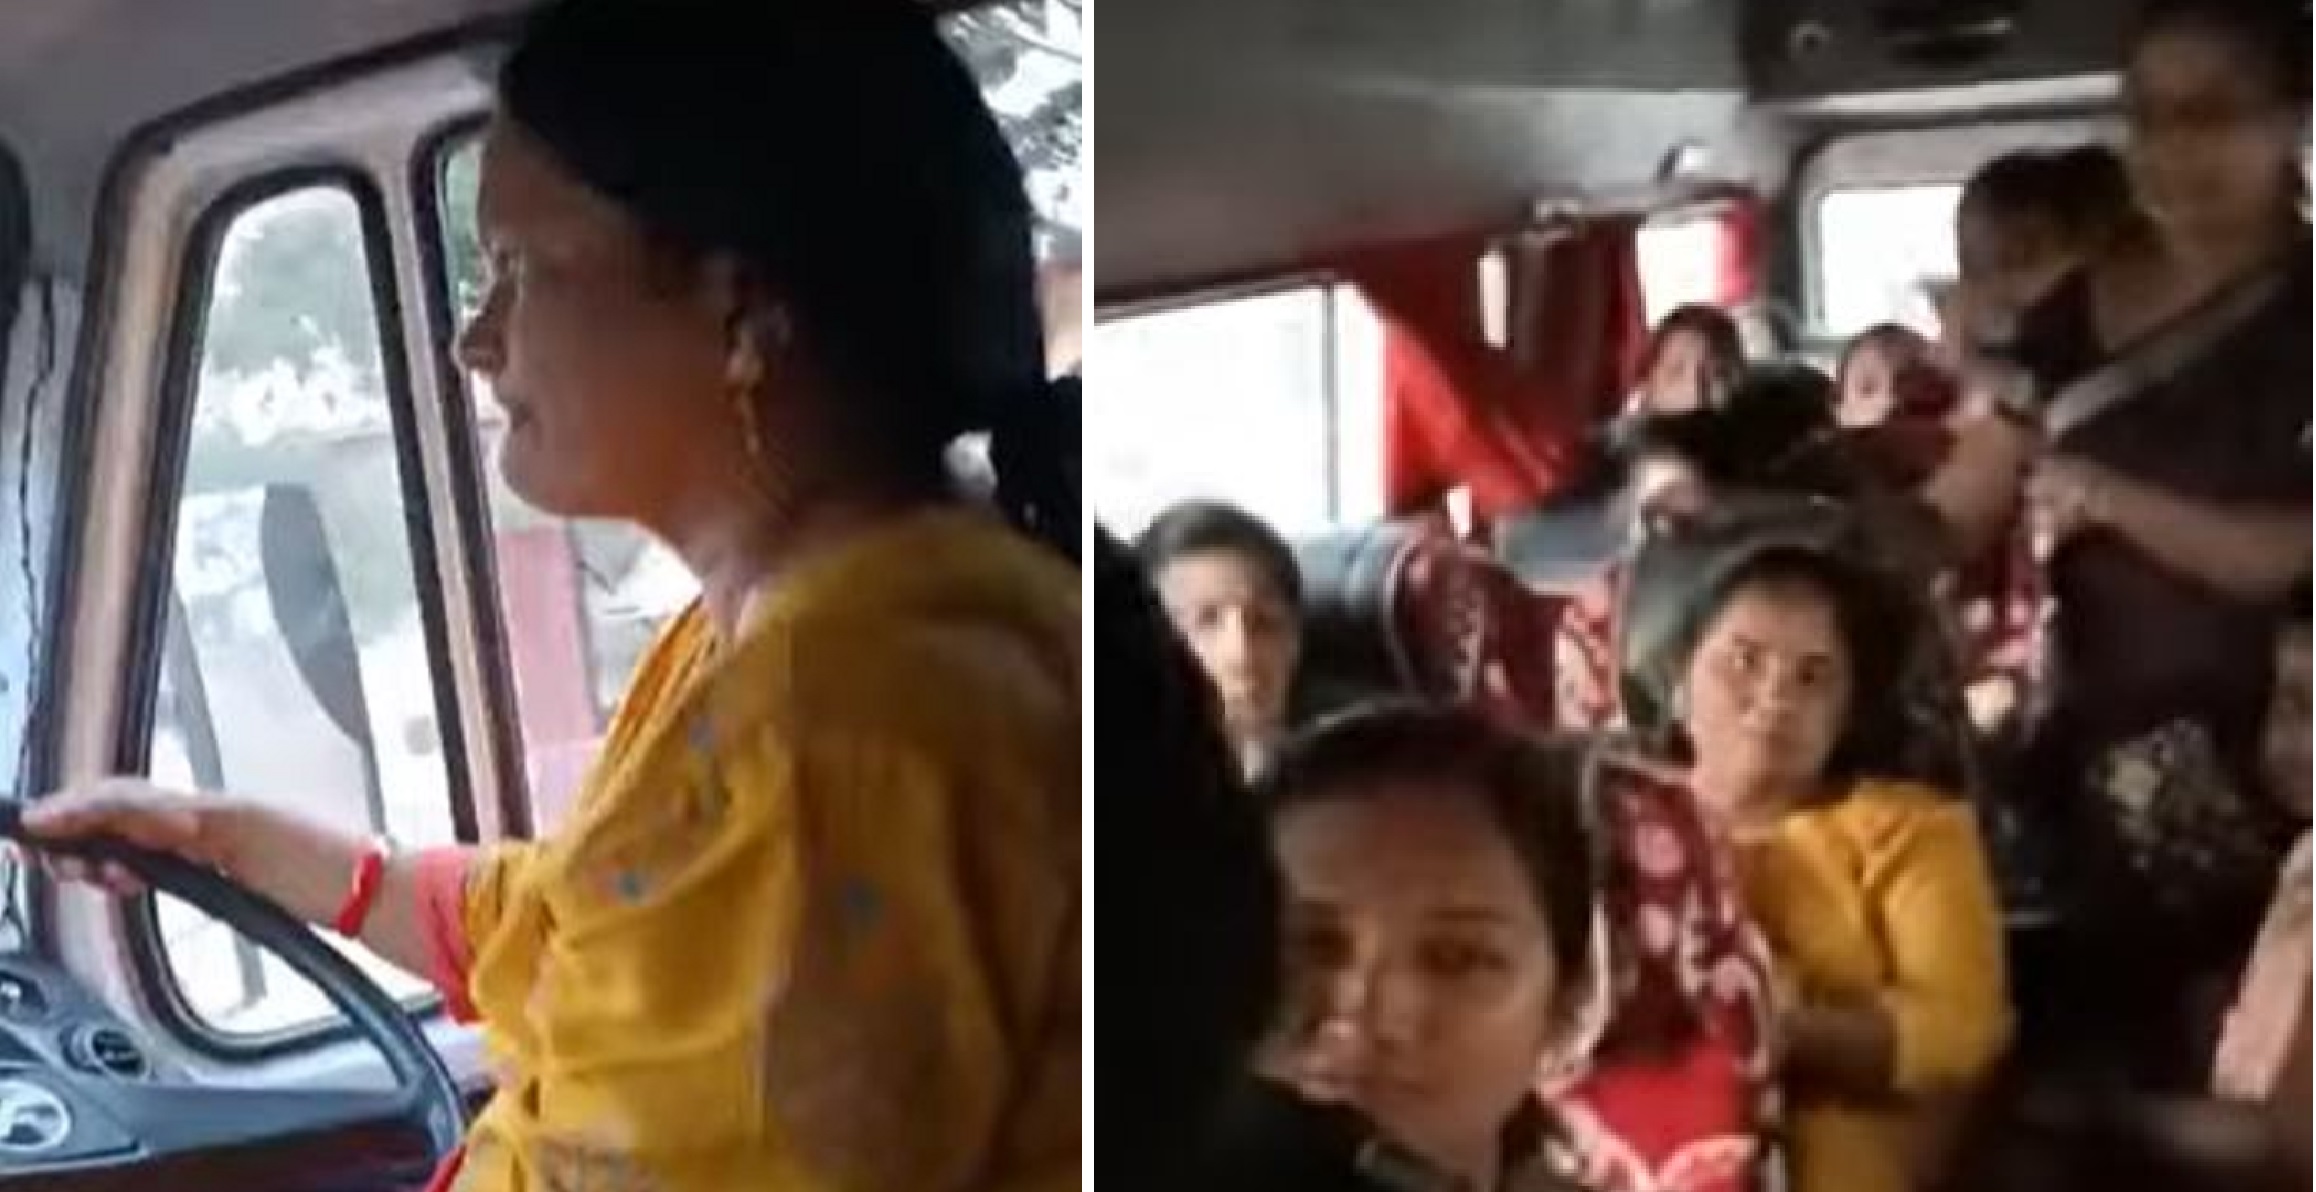 Pune Woman Saves Whole Bus Full Of People: After Driver Suffers Seizure Midway